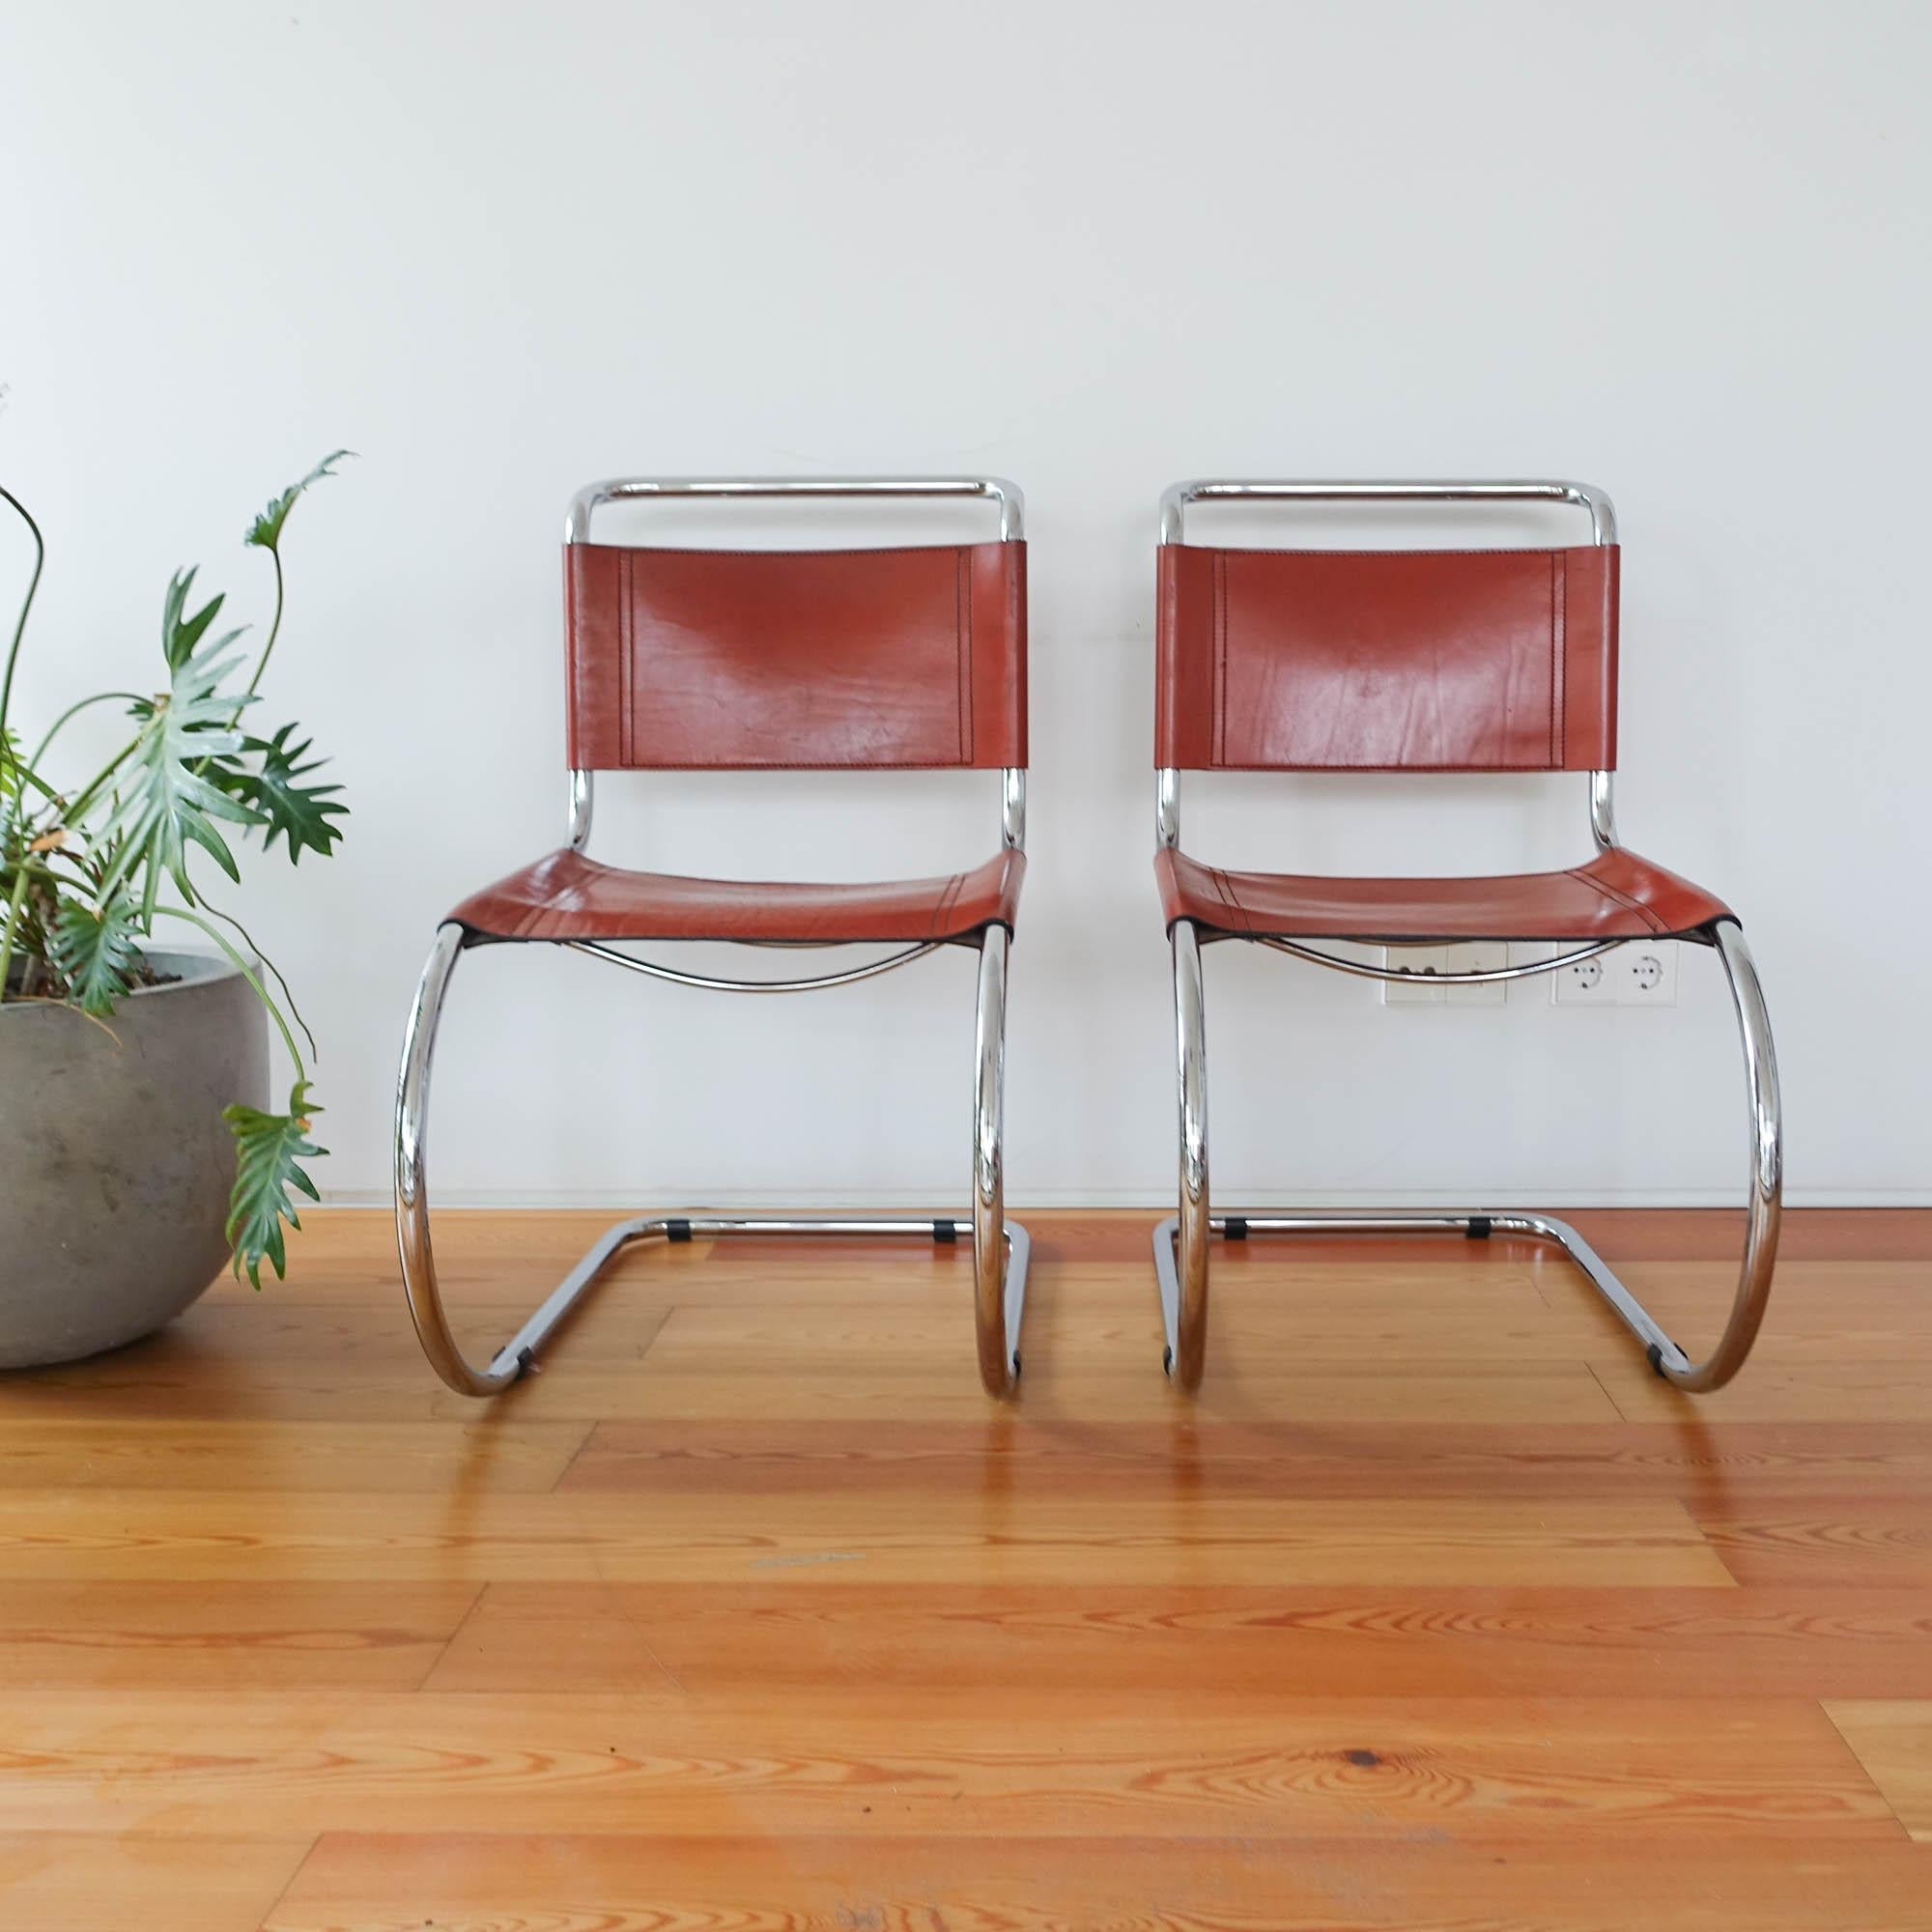 This set of four MR10 cantilever chairs, were designed by Ludwig Mies van der Rohe circa 1930 and crafted by an unknown manufacturer in Italy around 1970's. Inspired by Marcel Breuer's chairs, Mies van der Rohe replaced the right angles on the front